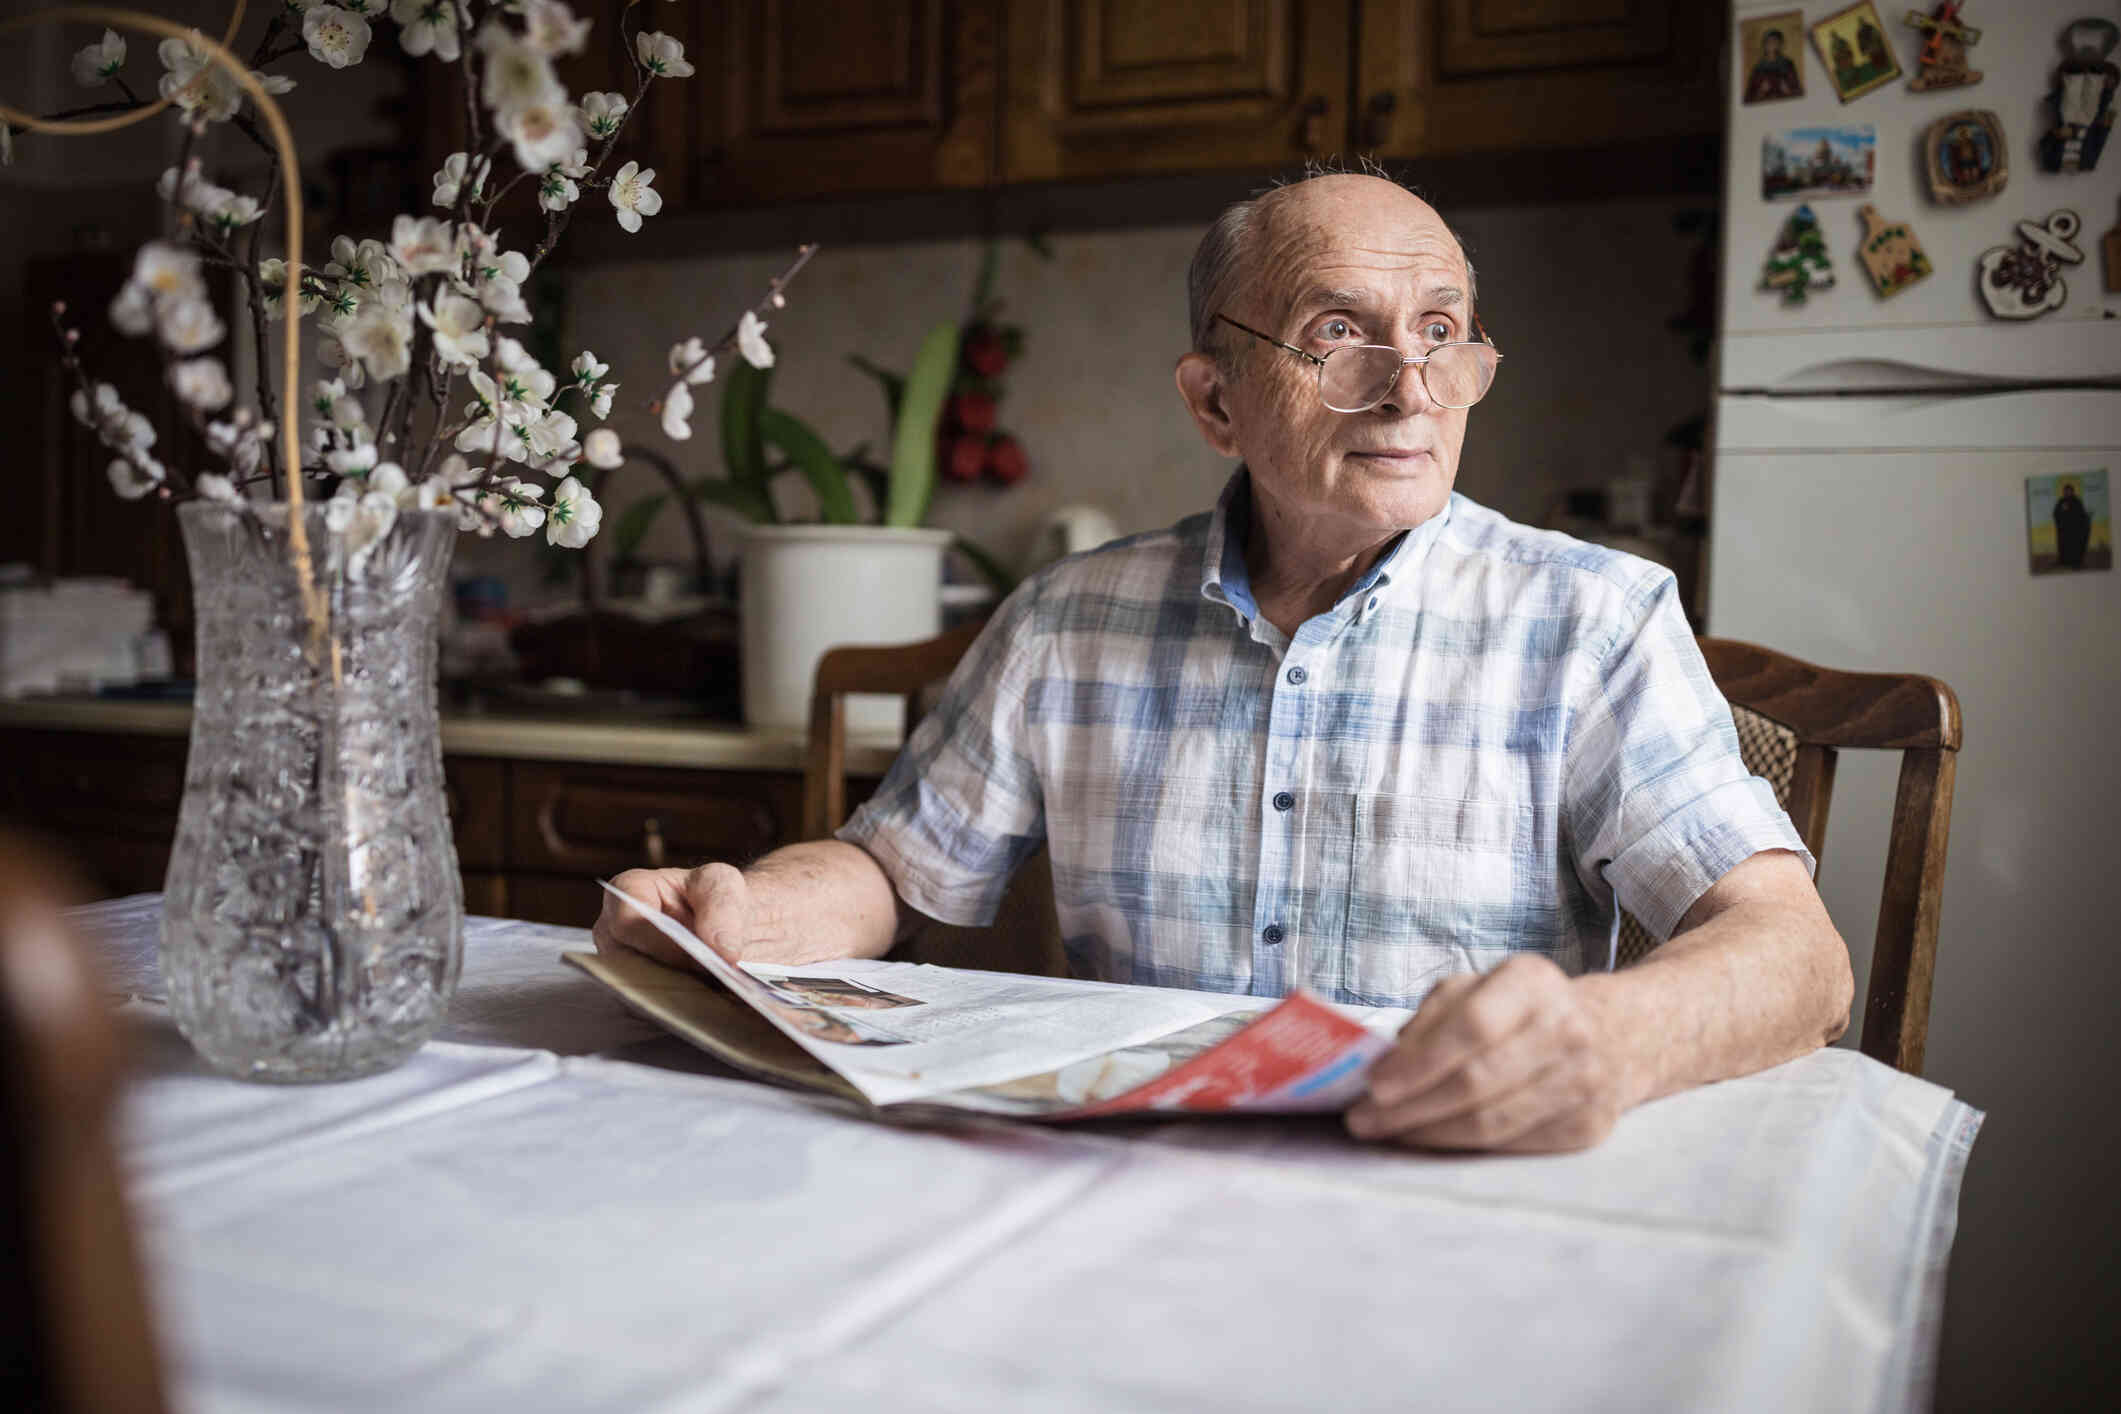 An elderly man sits at the kitchen table with a magazine and gazes off.